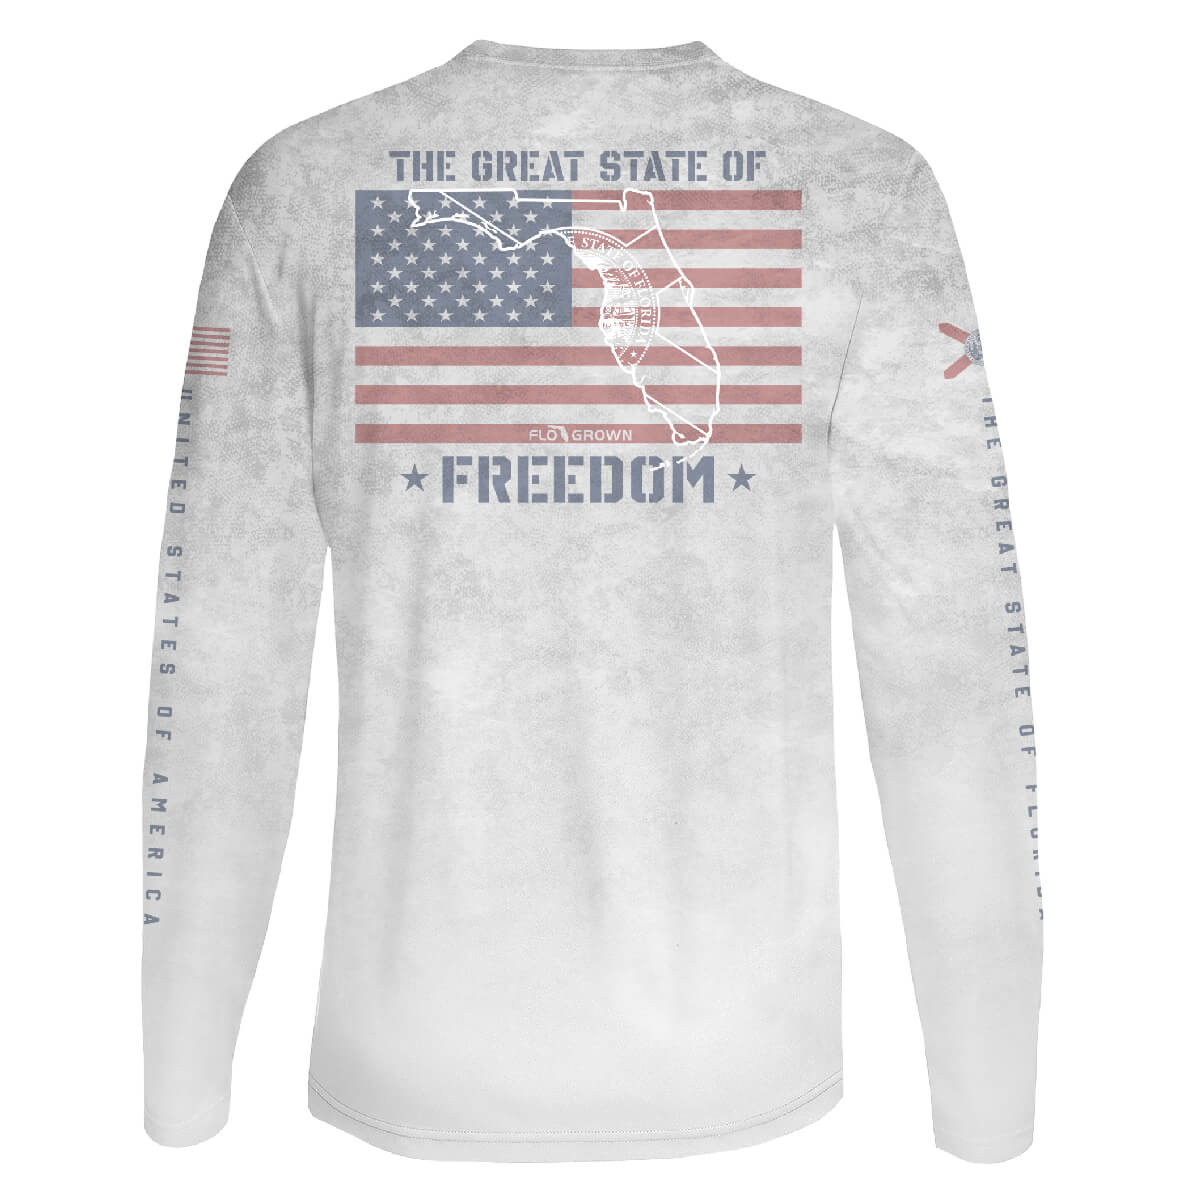 Great State of Freedom Performance Tee